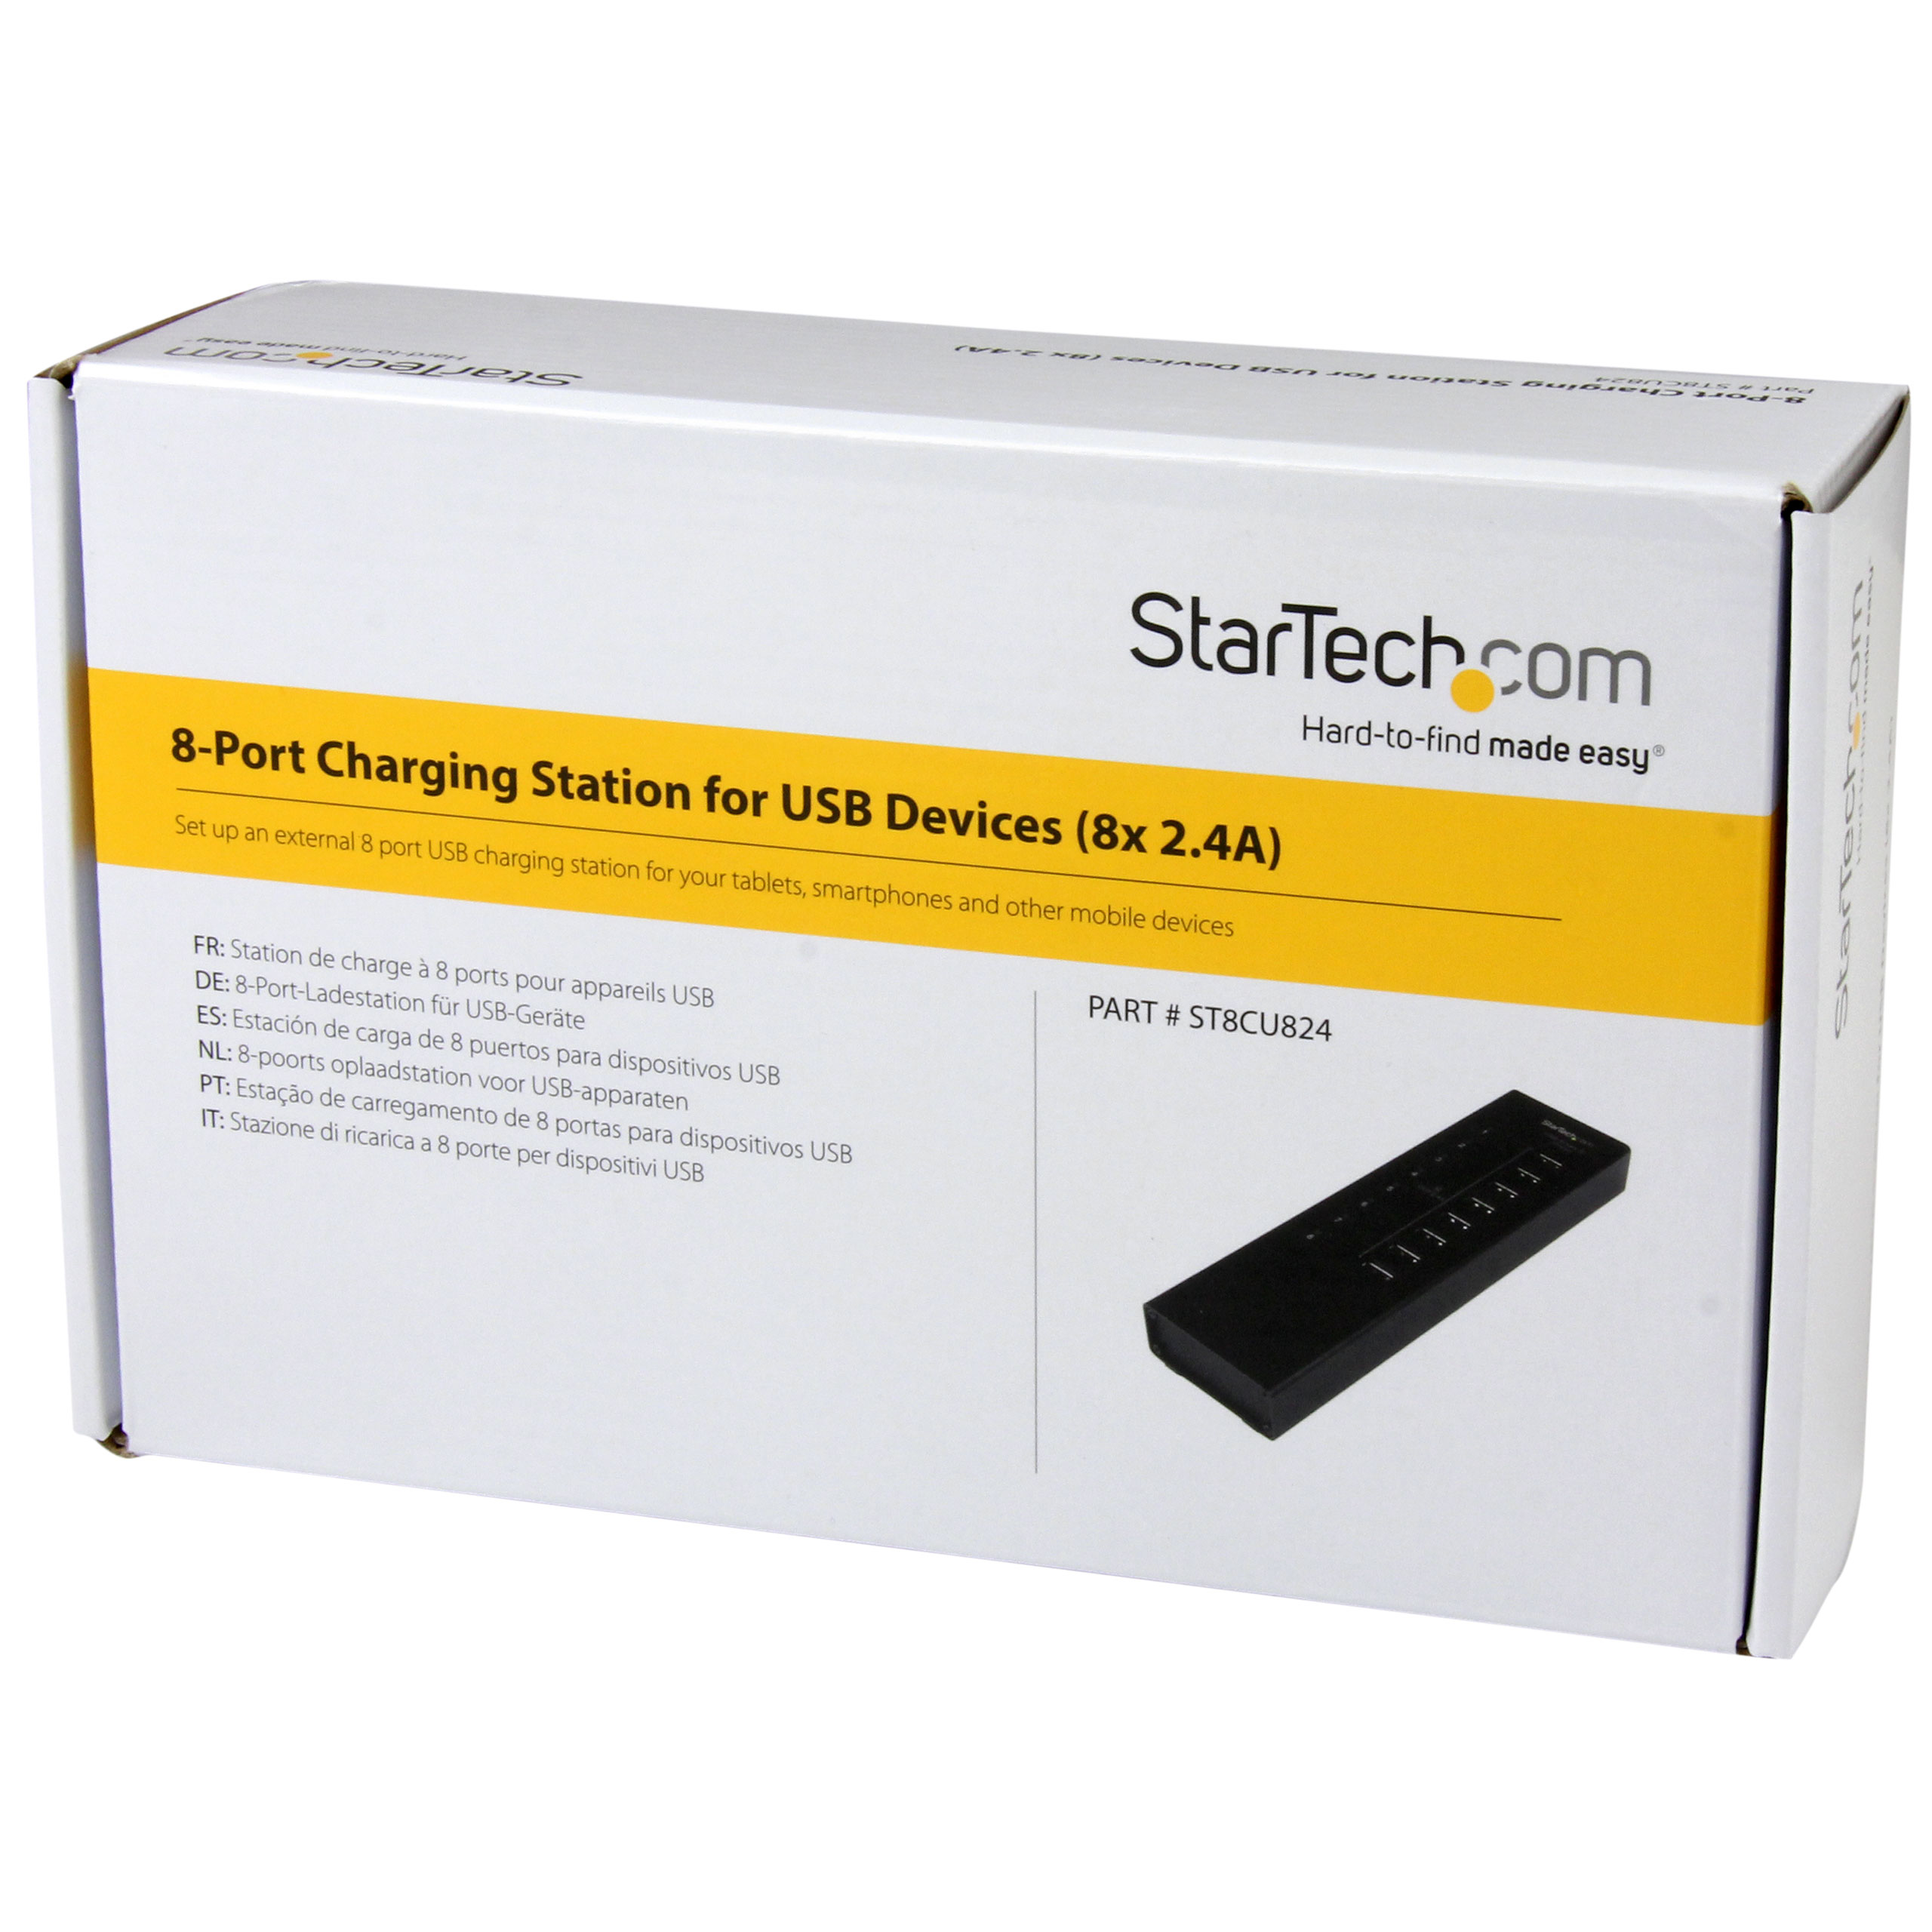 StarTech.com 8-Port Charging Station for USB Devices - 96W/19.2A - Dedicated Desktop Multi-Device USB Charging Station - image 3 of 4